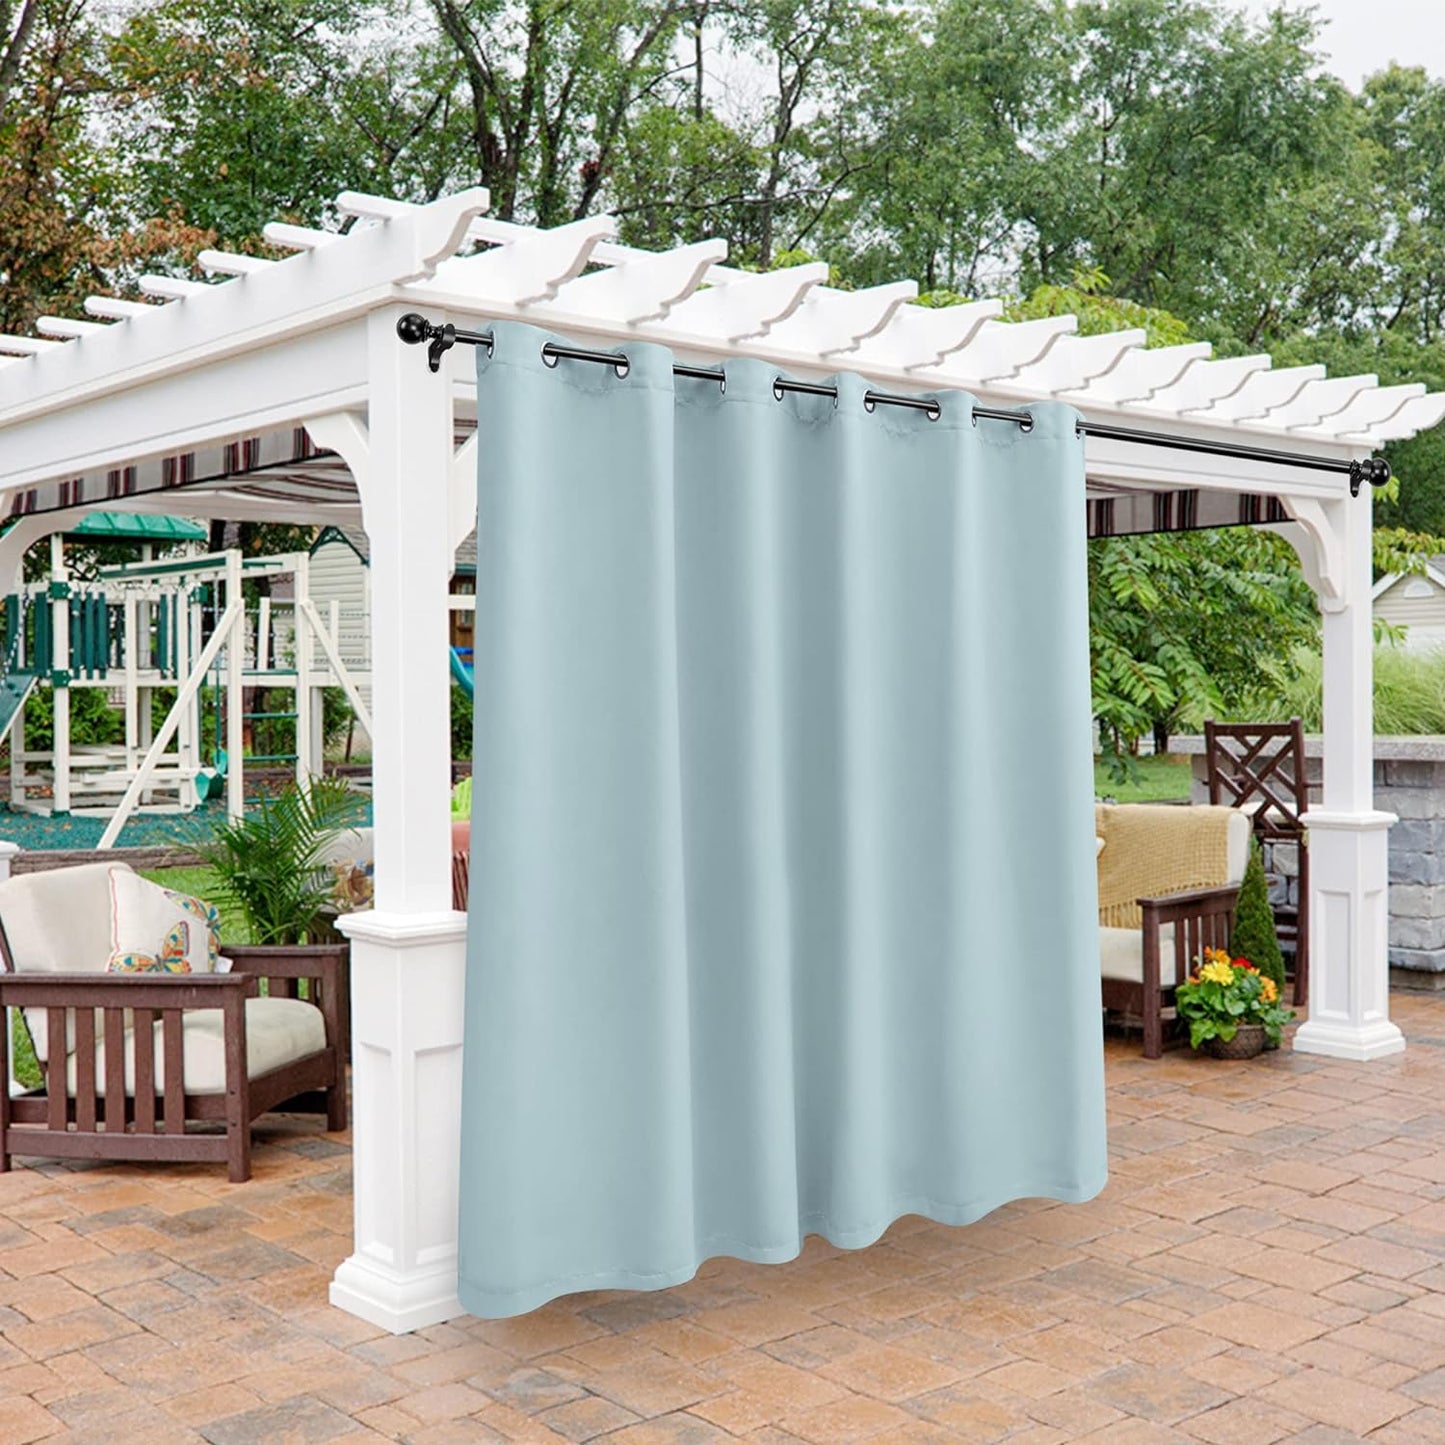 BONZER Outdoor Curtains for Patio Waterproof - Light Blocking Weather Resistant Privacy Grommet Blackout Curtains for Gazebo, Porch, Pergola, Cabana, Deck, Sunroom, 1 Panel, 52W X 84L Inch, Silver  BONZER Seafoam 100W X 95 Inch 